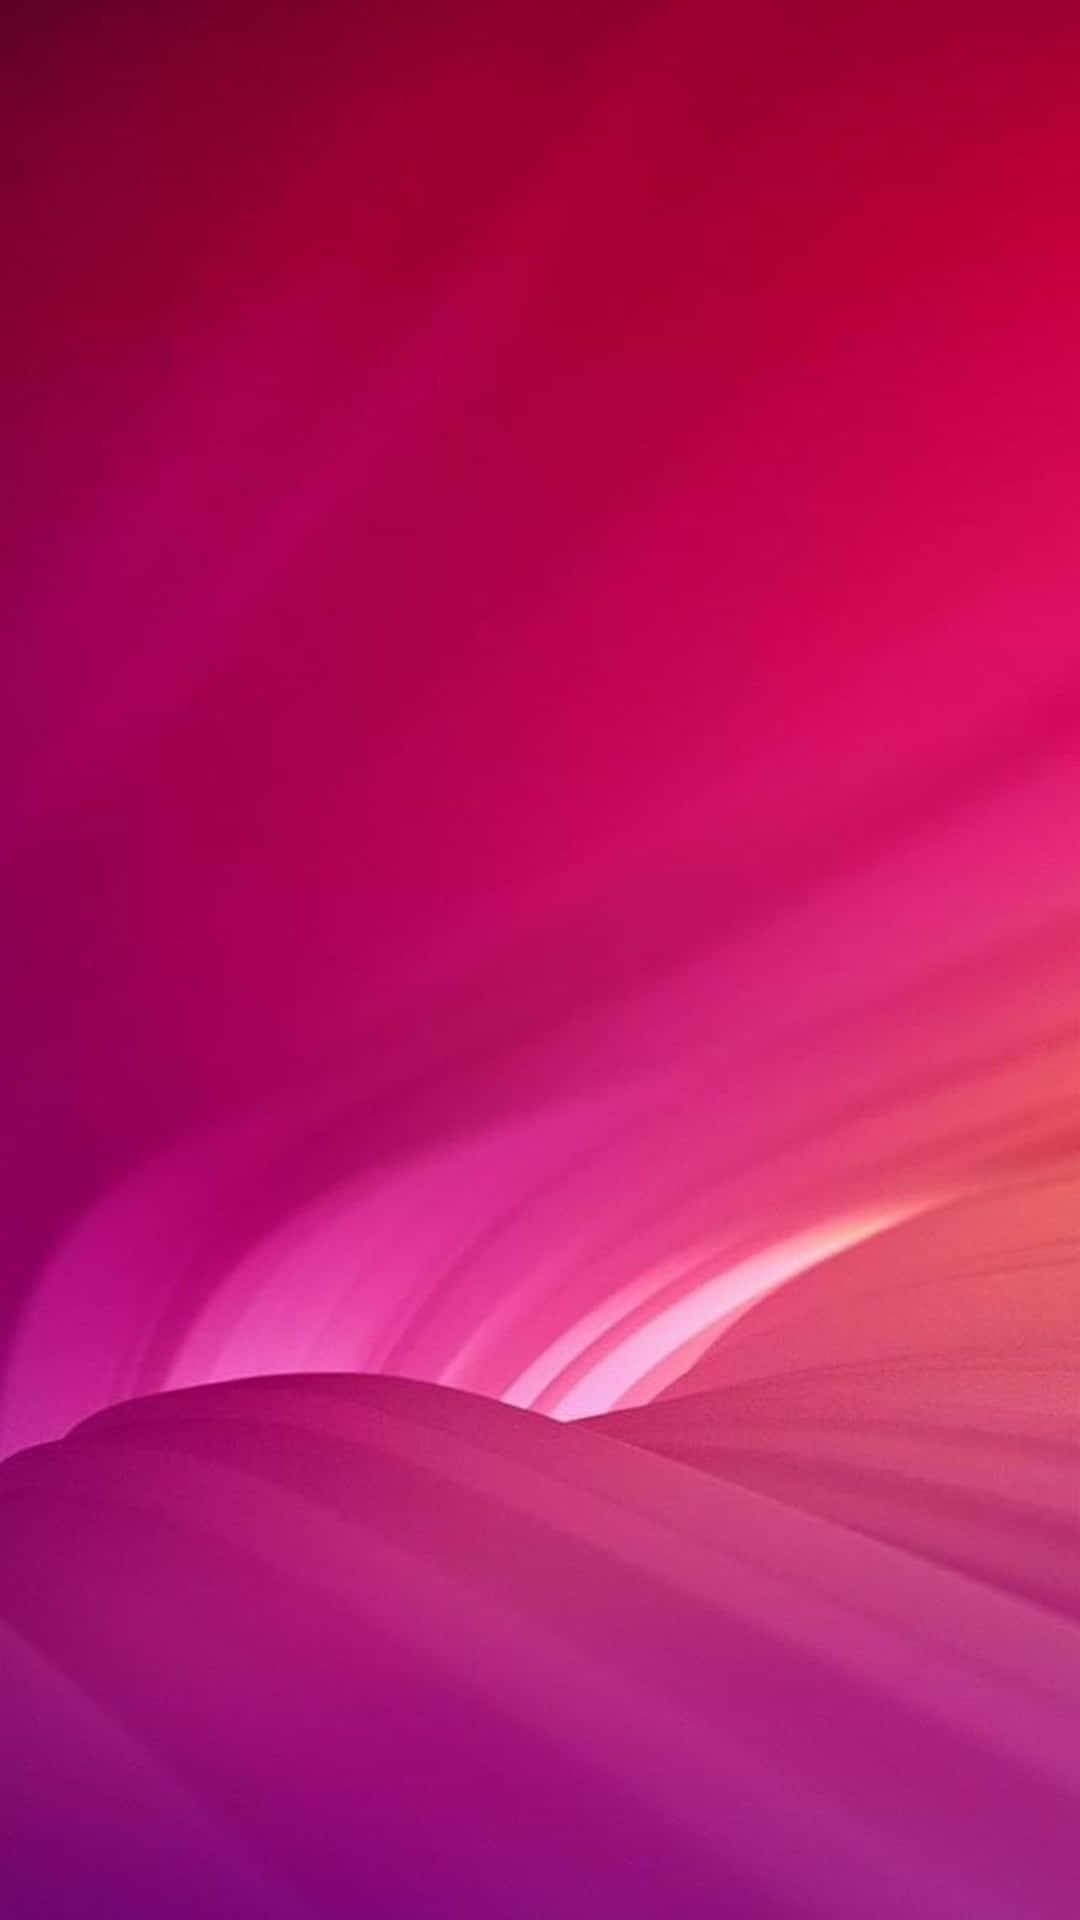 Download Caption: Stylish Galaxy Note 4 Wallpaper | Wallpapers.Com